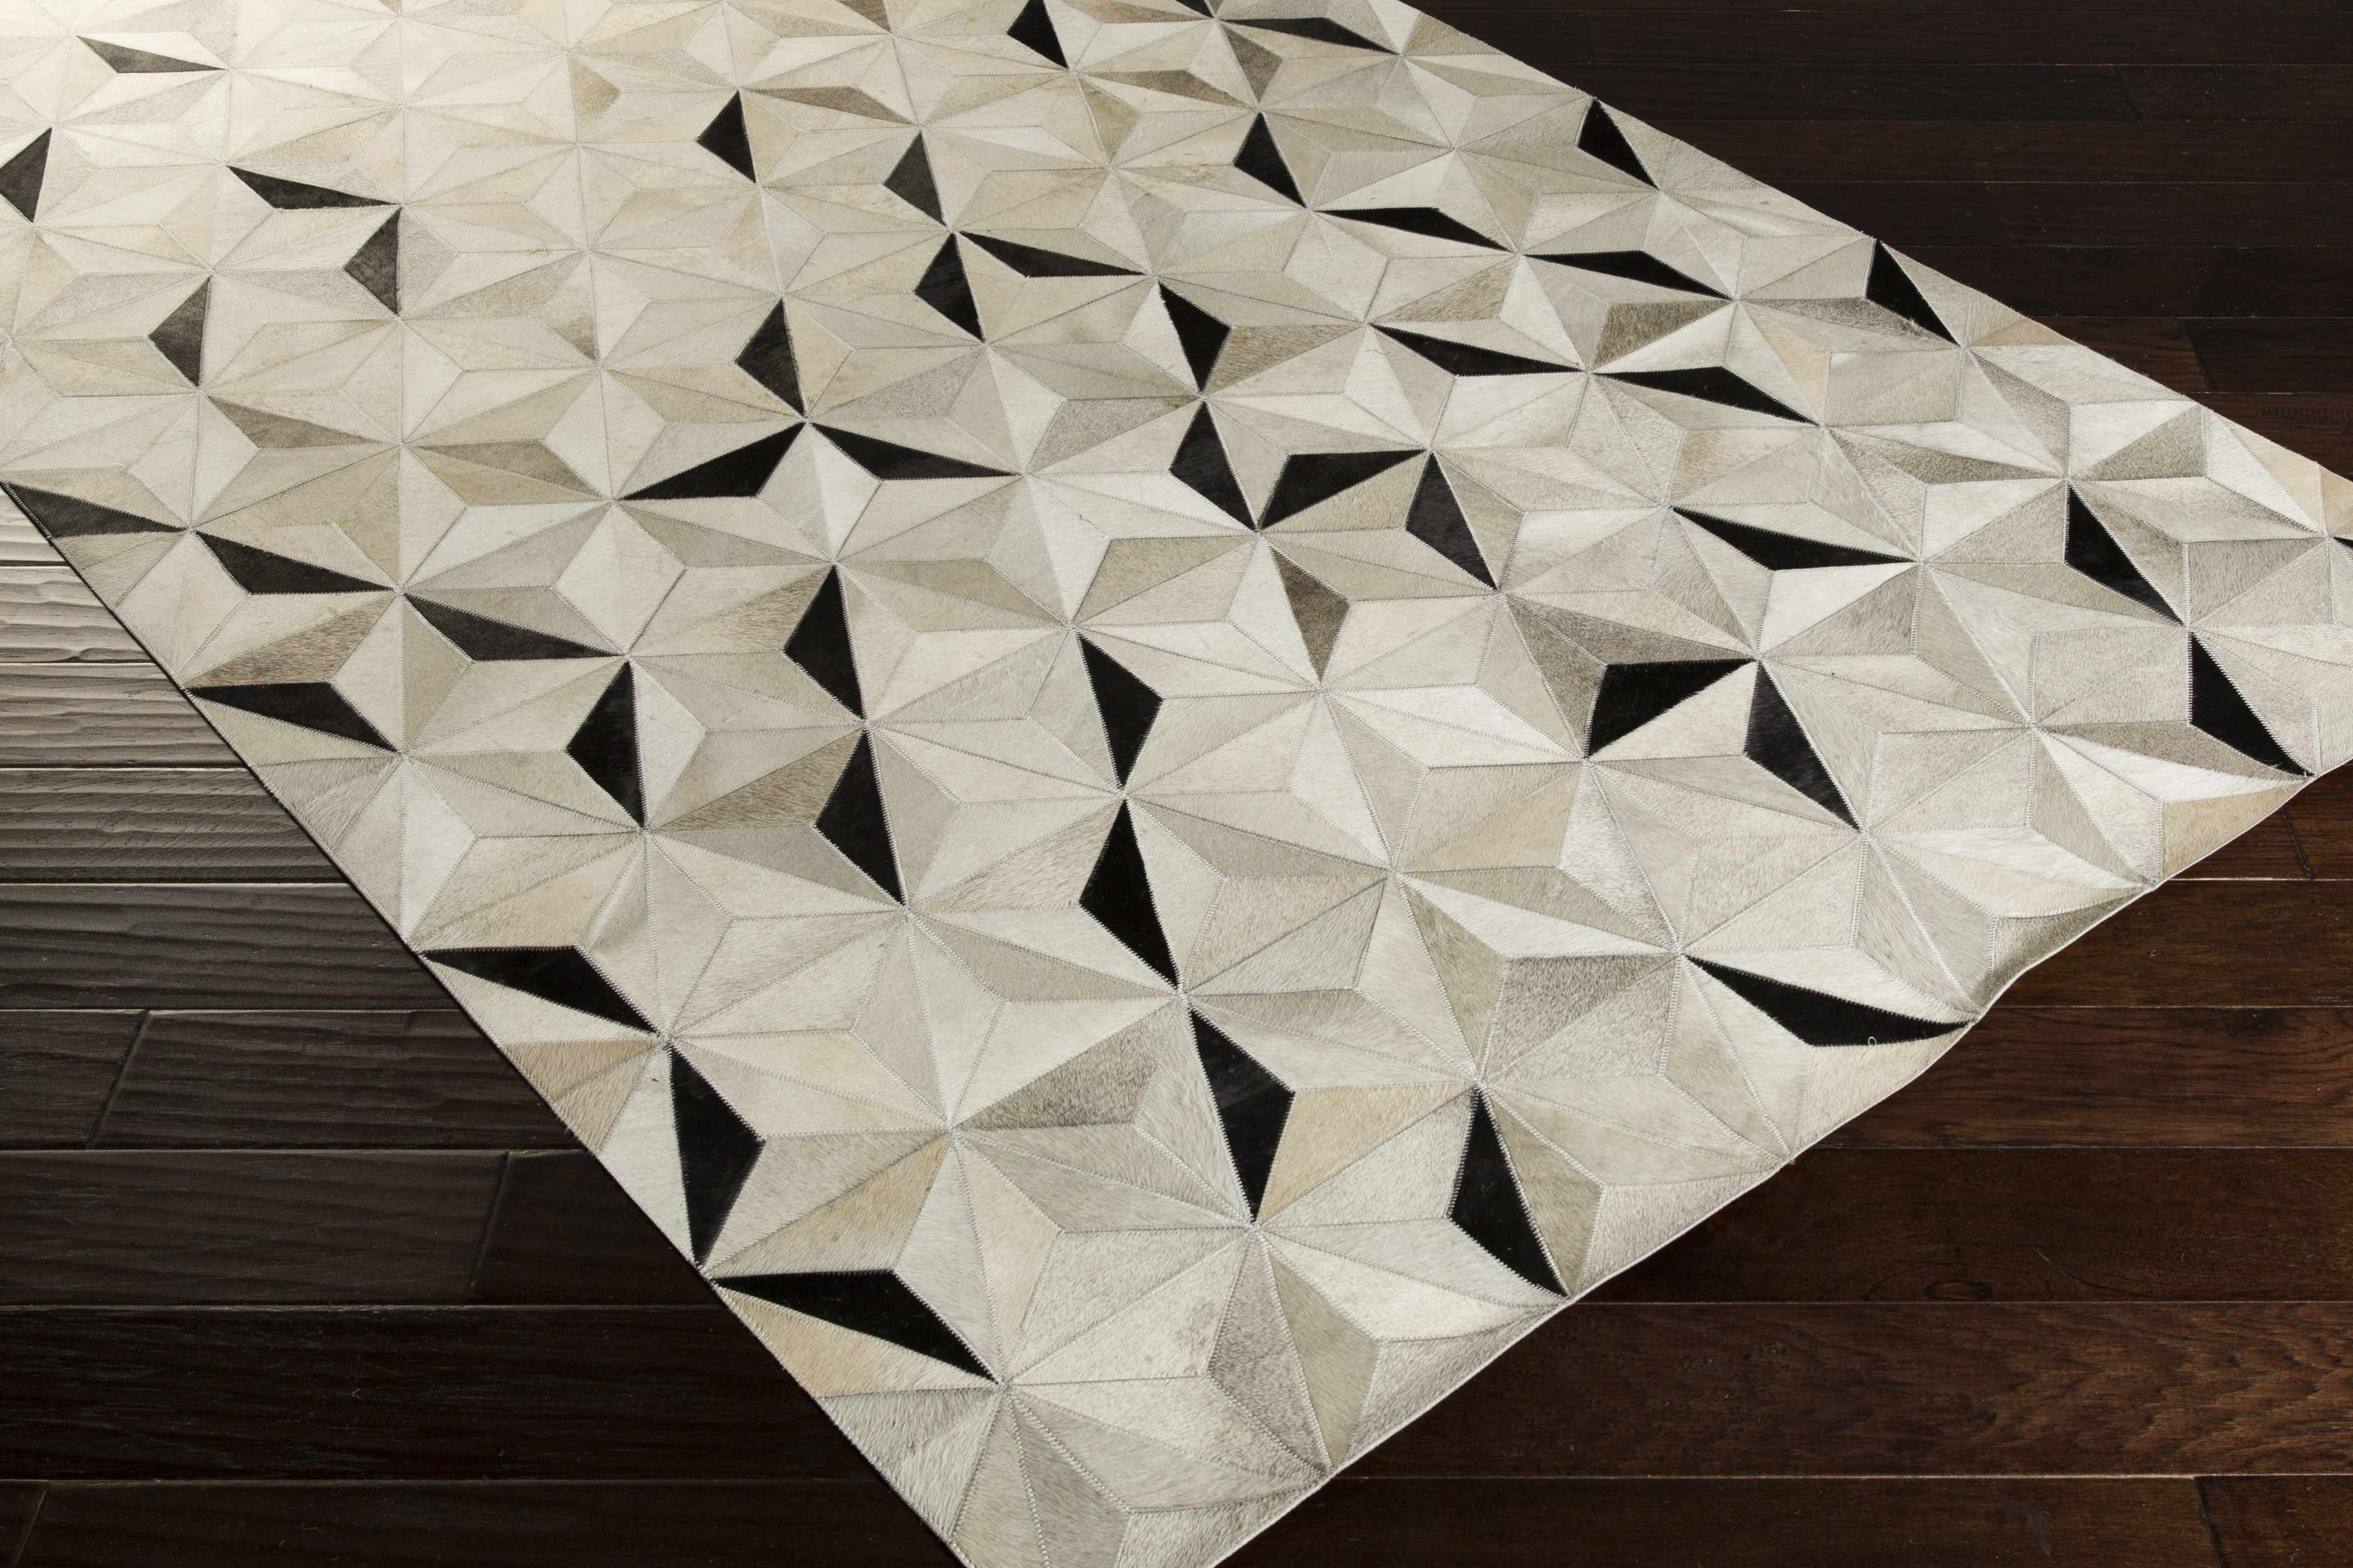 Veyo 6' x 9' Hides and Leather Cowhide Leather Area Rug - Hauteloom